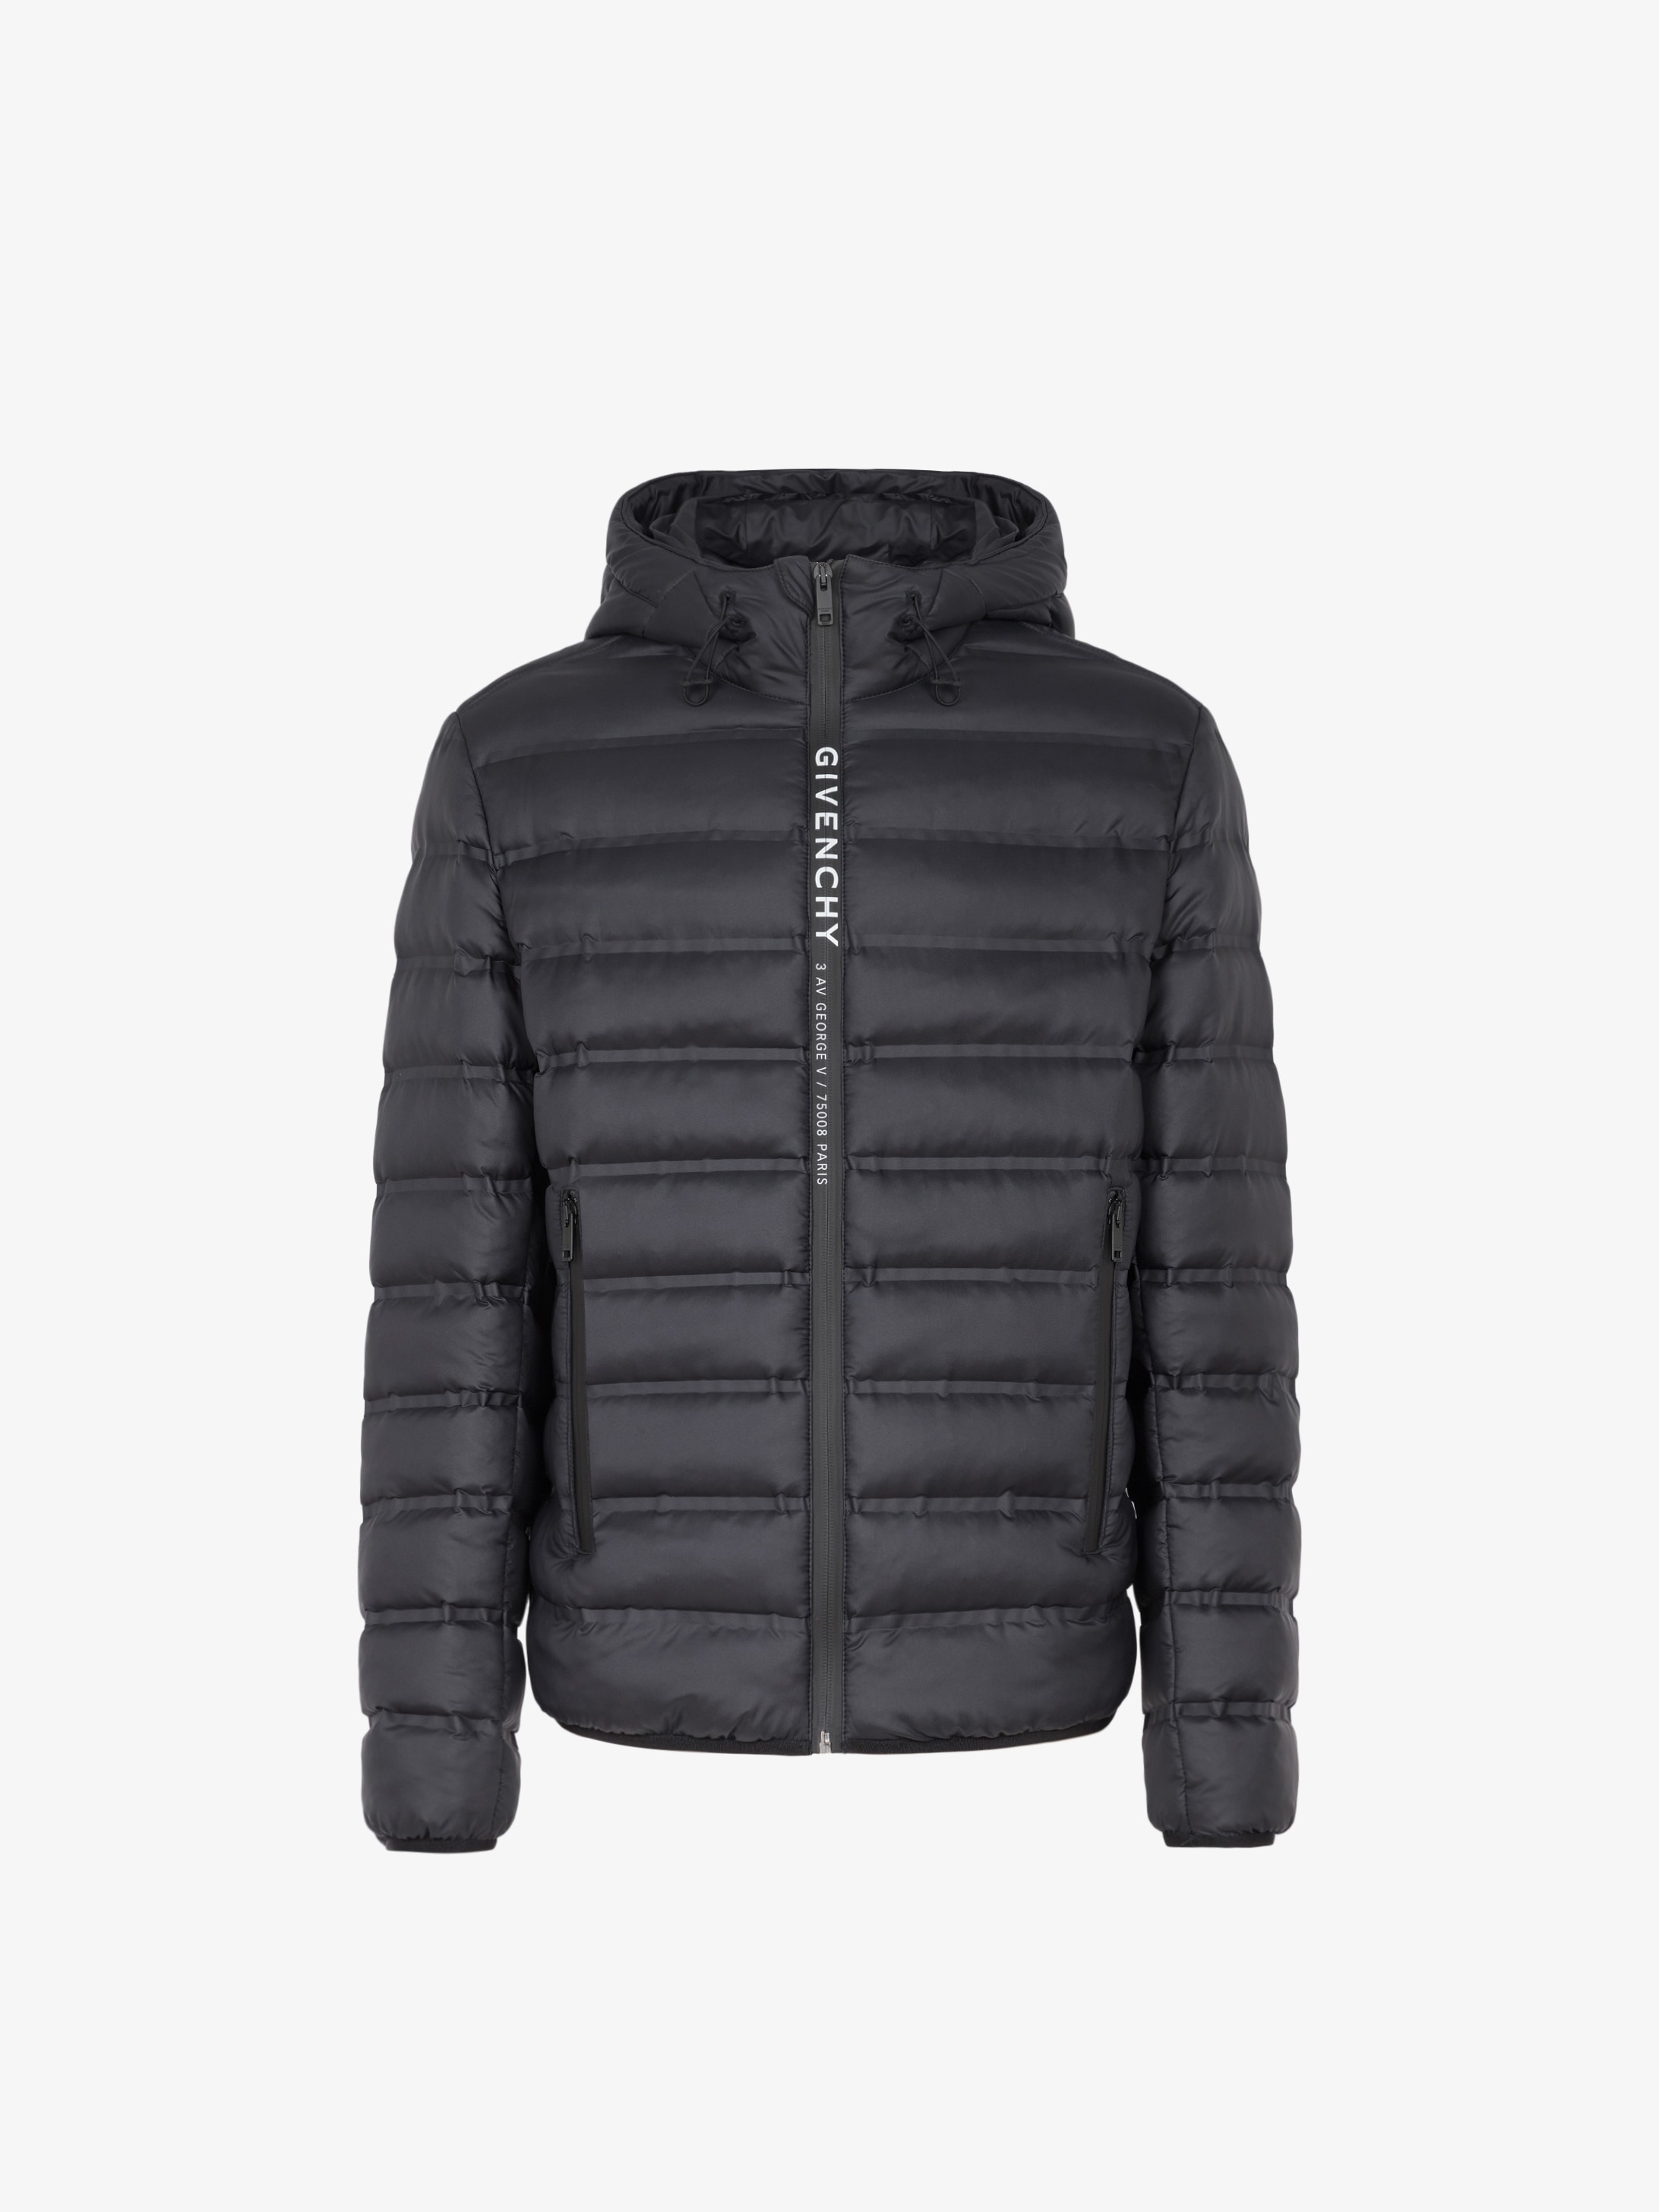 givenchy puffer jacket women's